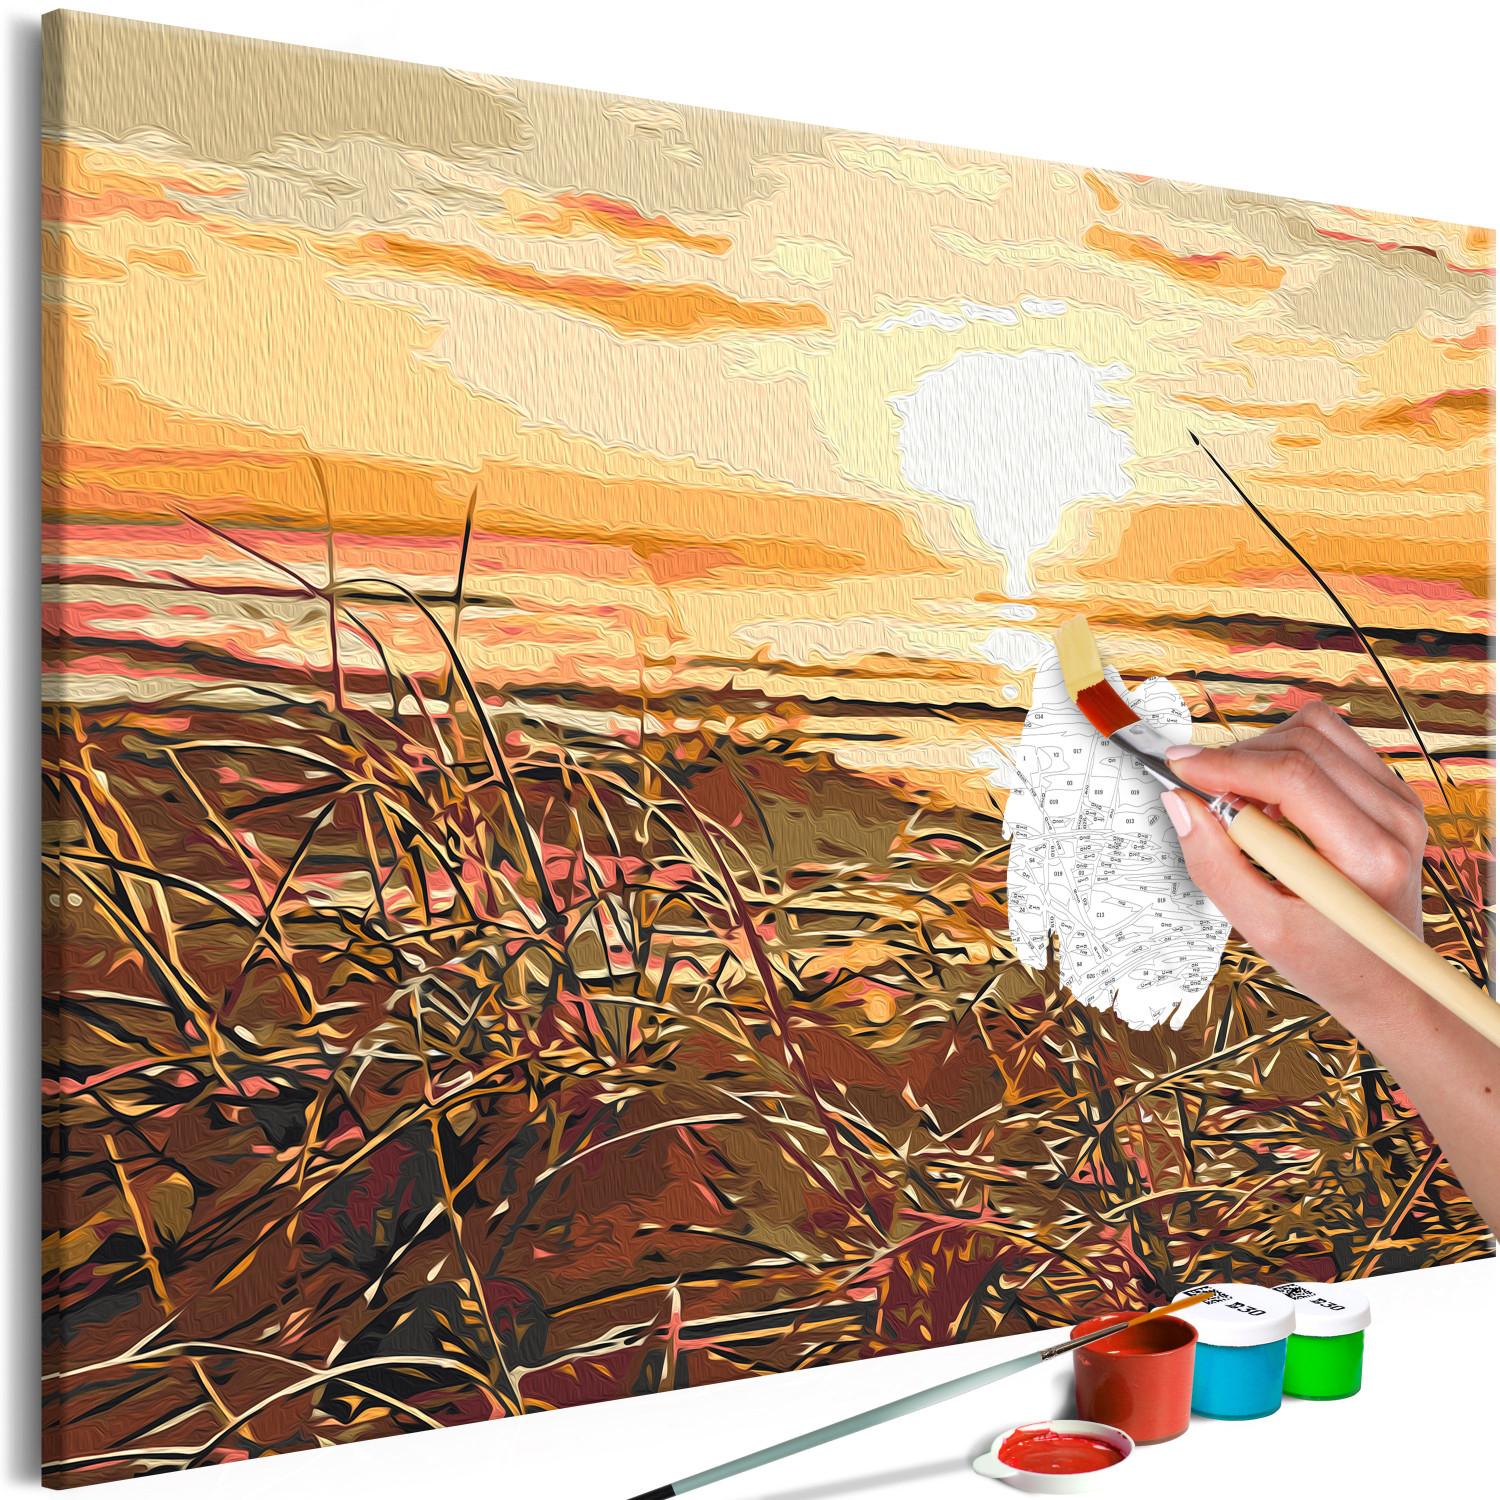 Paint by Number Kit Warm Breeze - Glittering Setting Sun Against the Sea